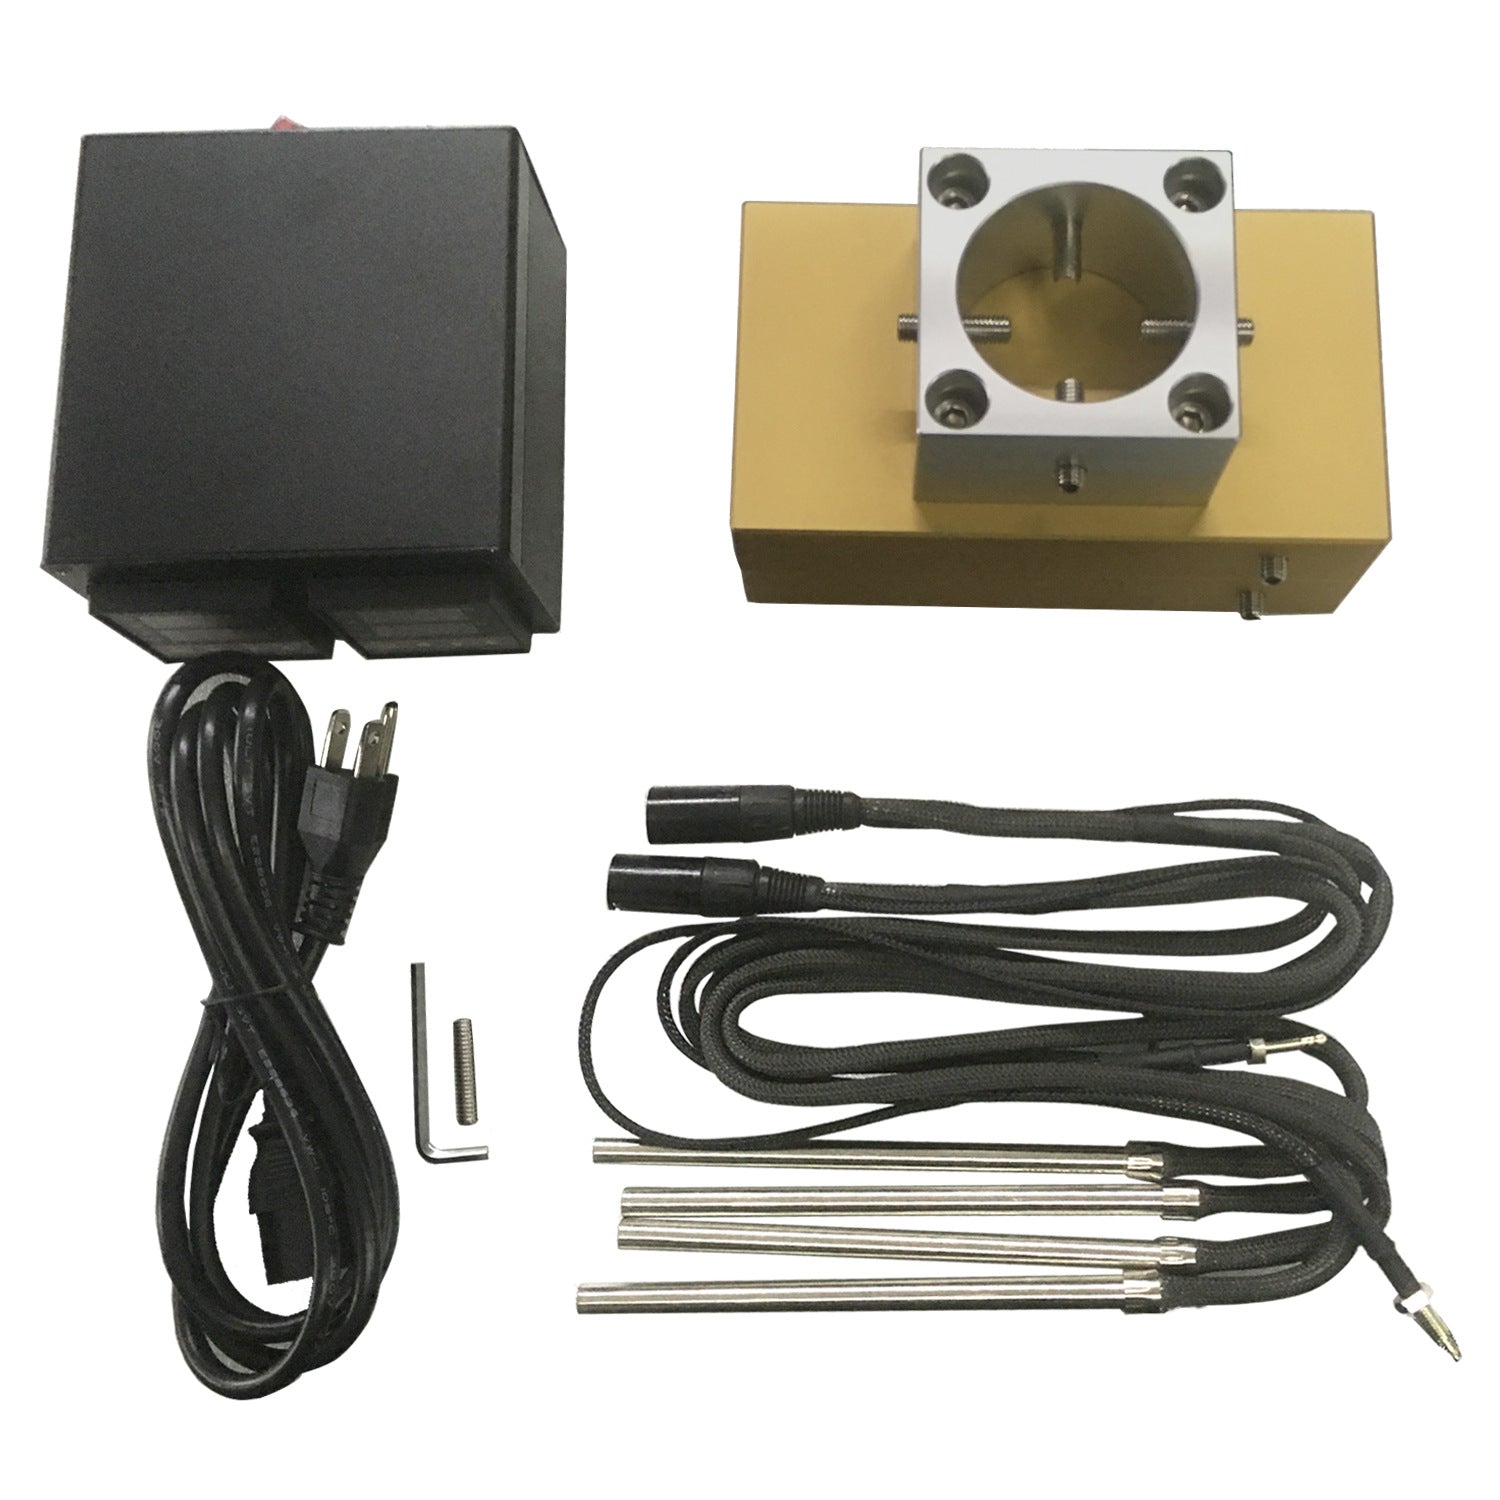 ECO Farm Rosin Press Plate Kit 4"x7" Rosin Extractor With 4 Heating Rods-growpackage.com